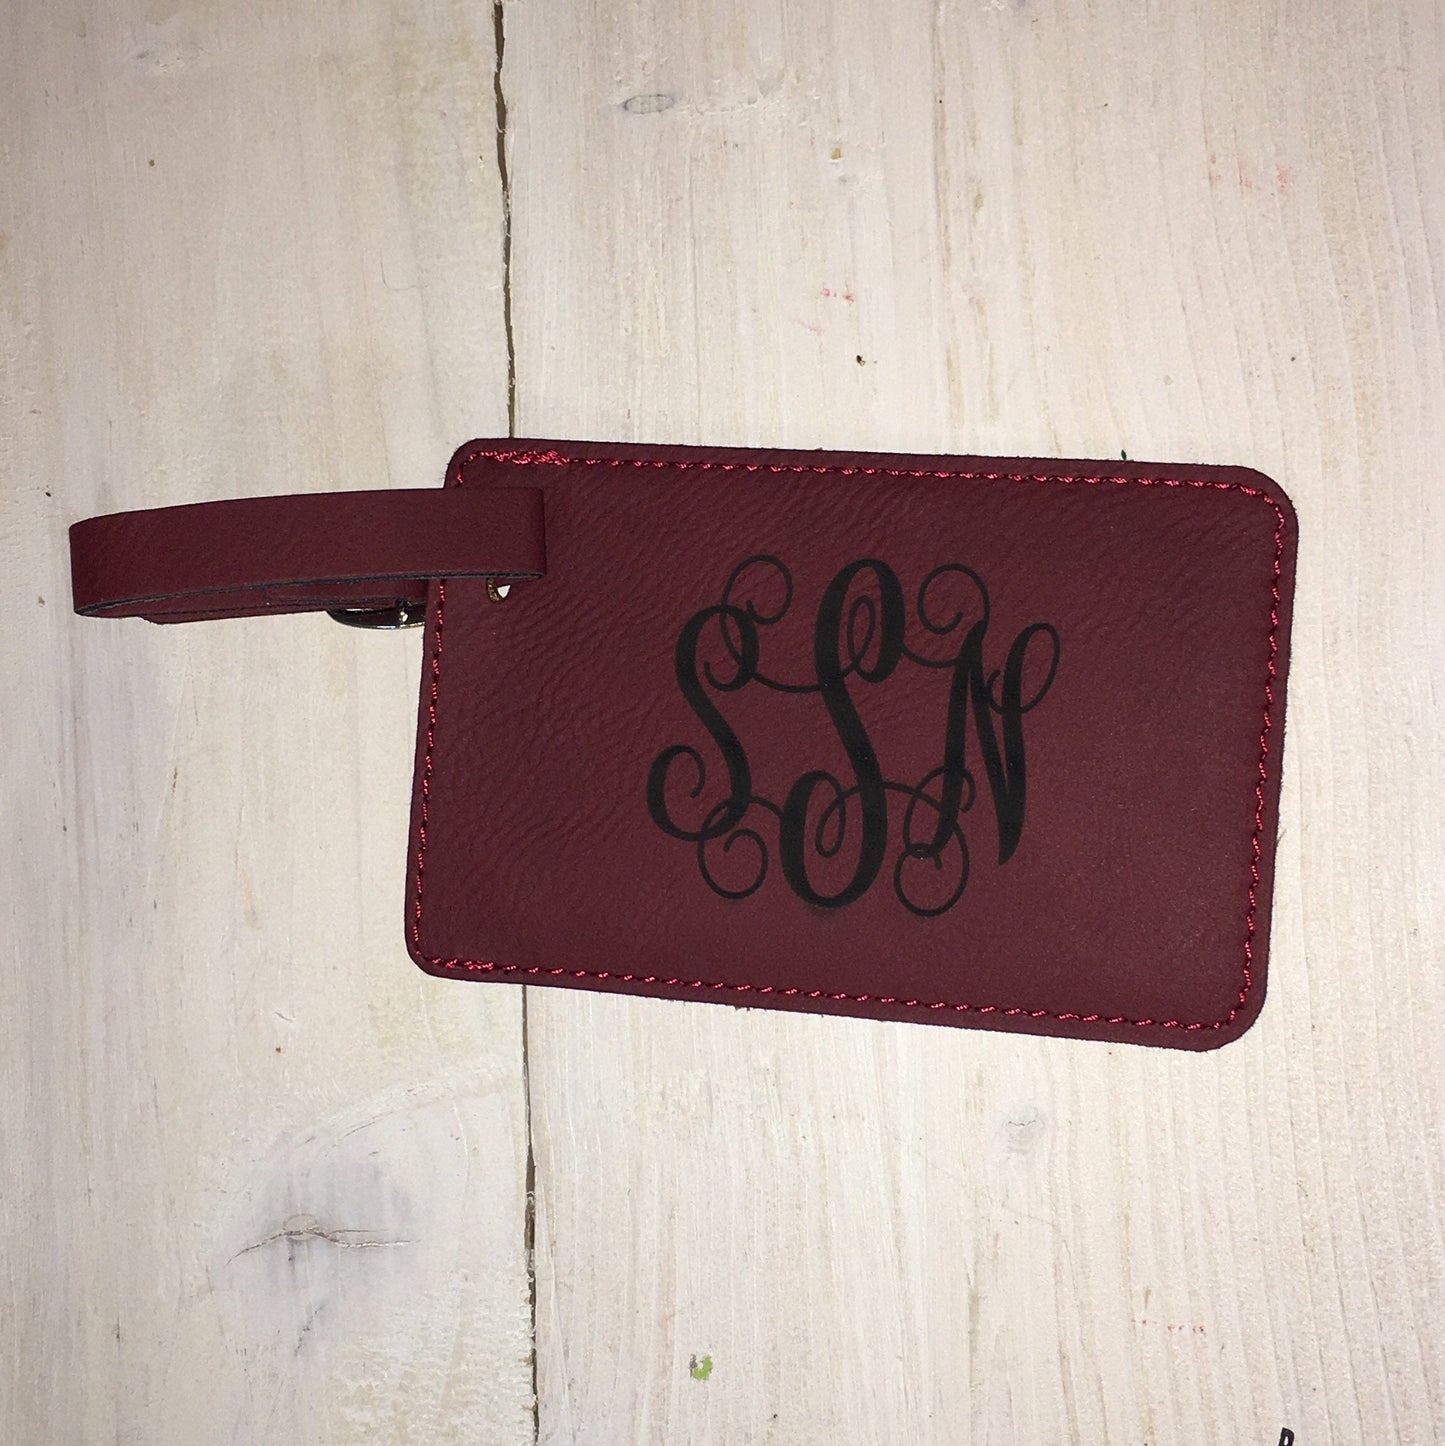 Personalized Luggage Tags, Monogram Luggage Tags, Leatherette Luggage Tags